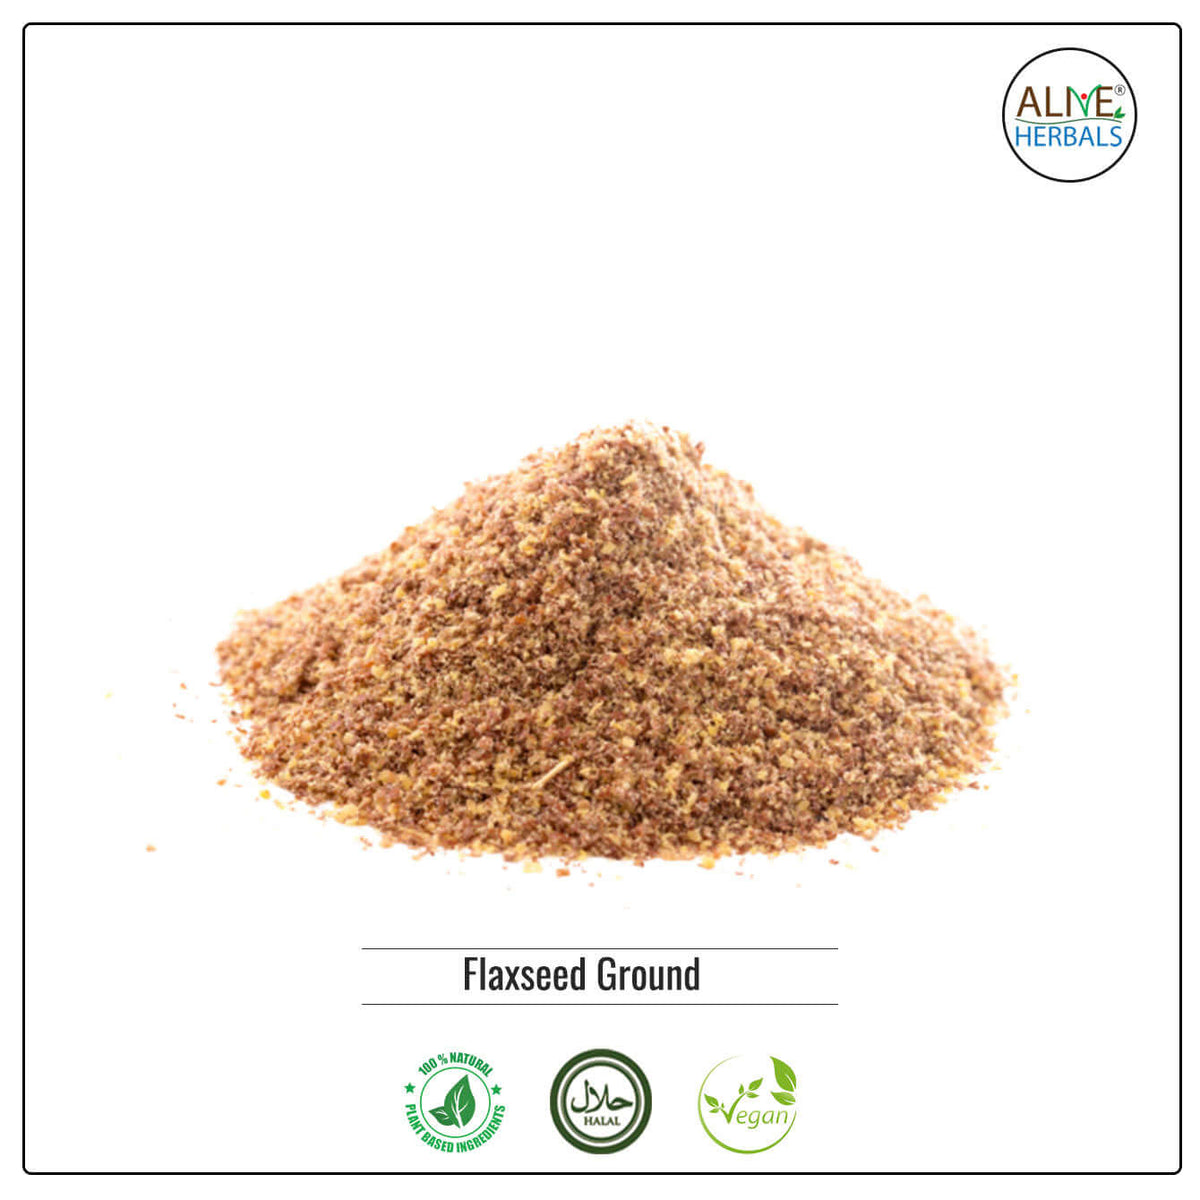 Flaxseed Ground - Shop at Natural Food Store | Alive Herbals.